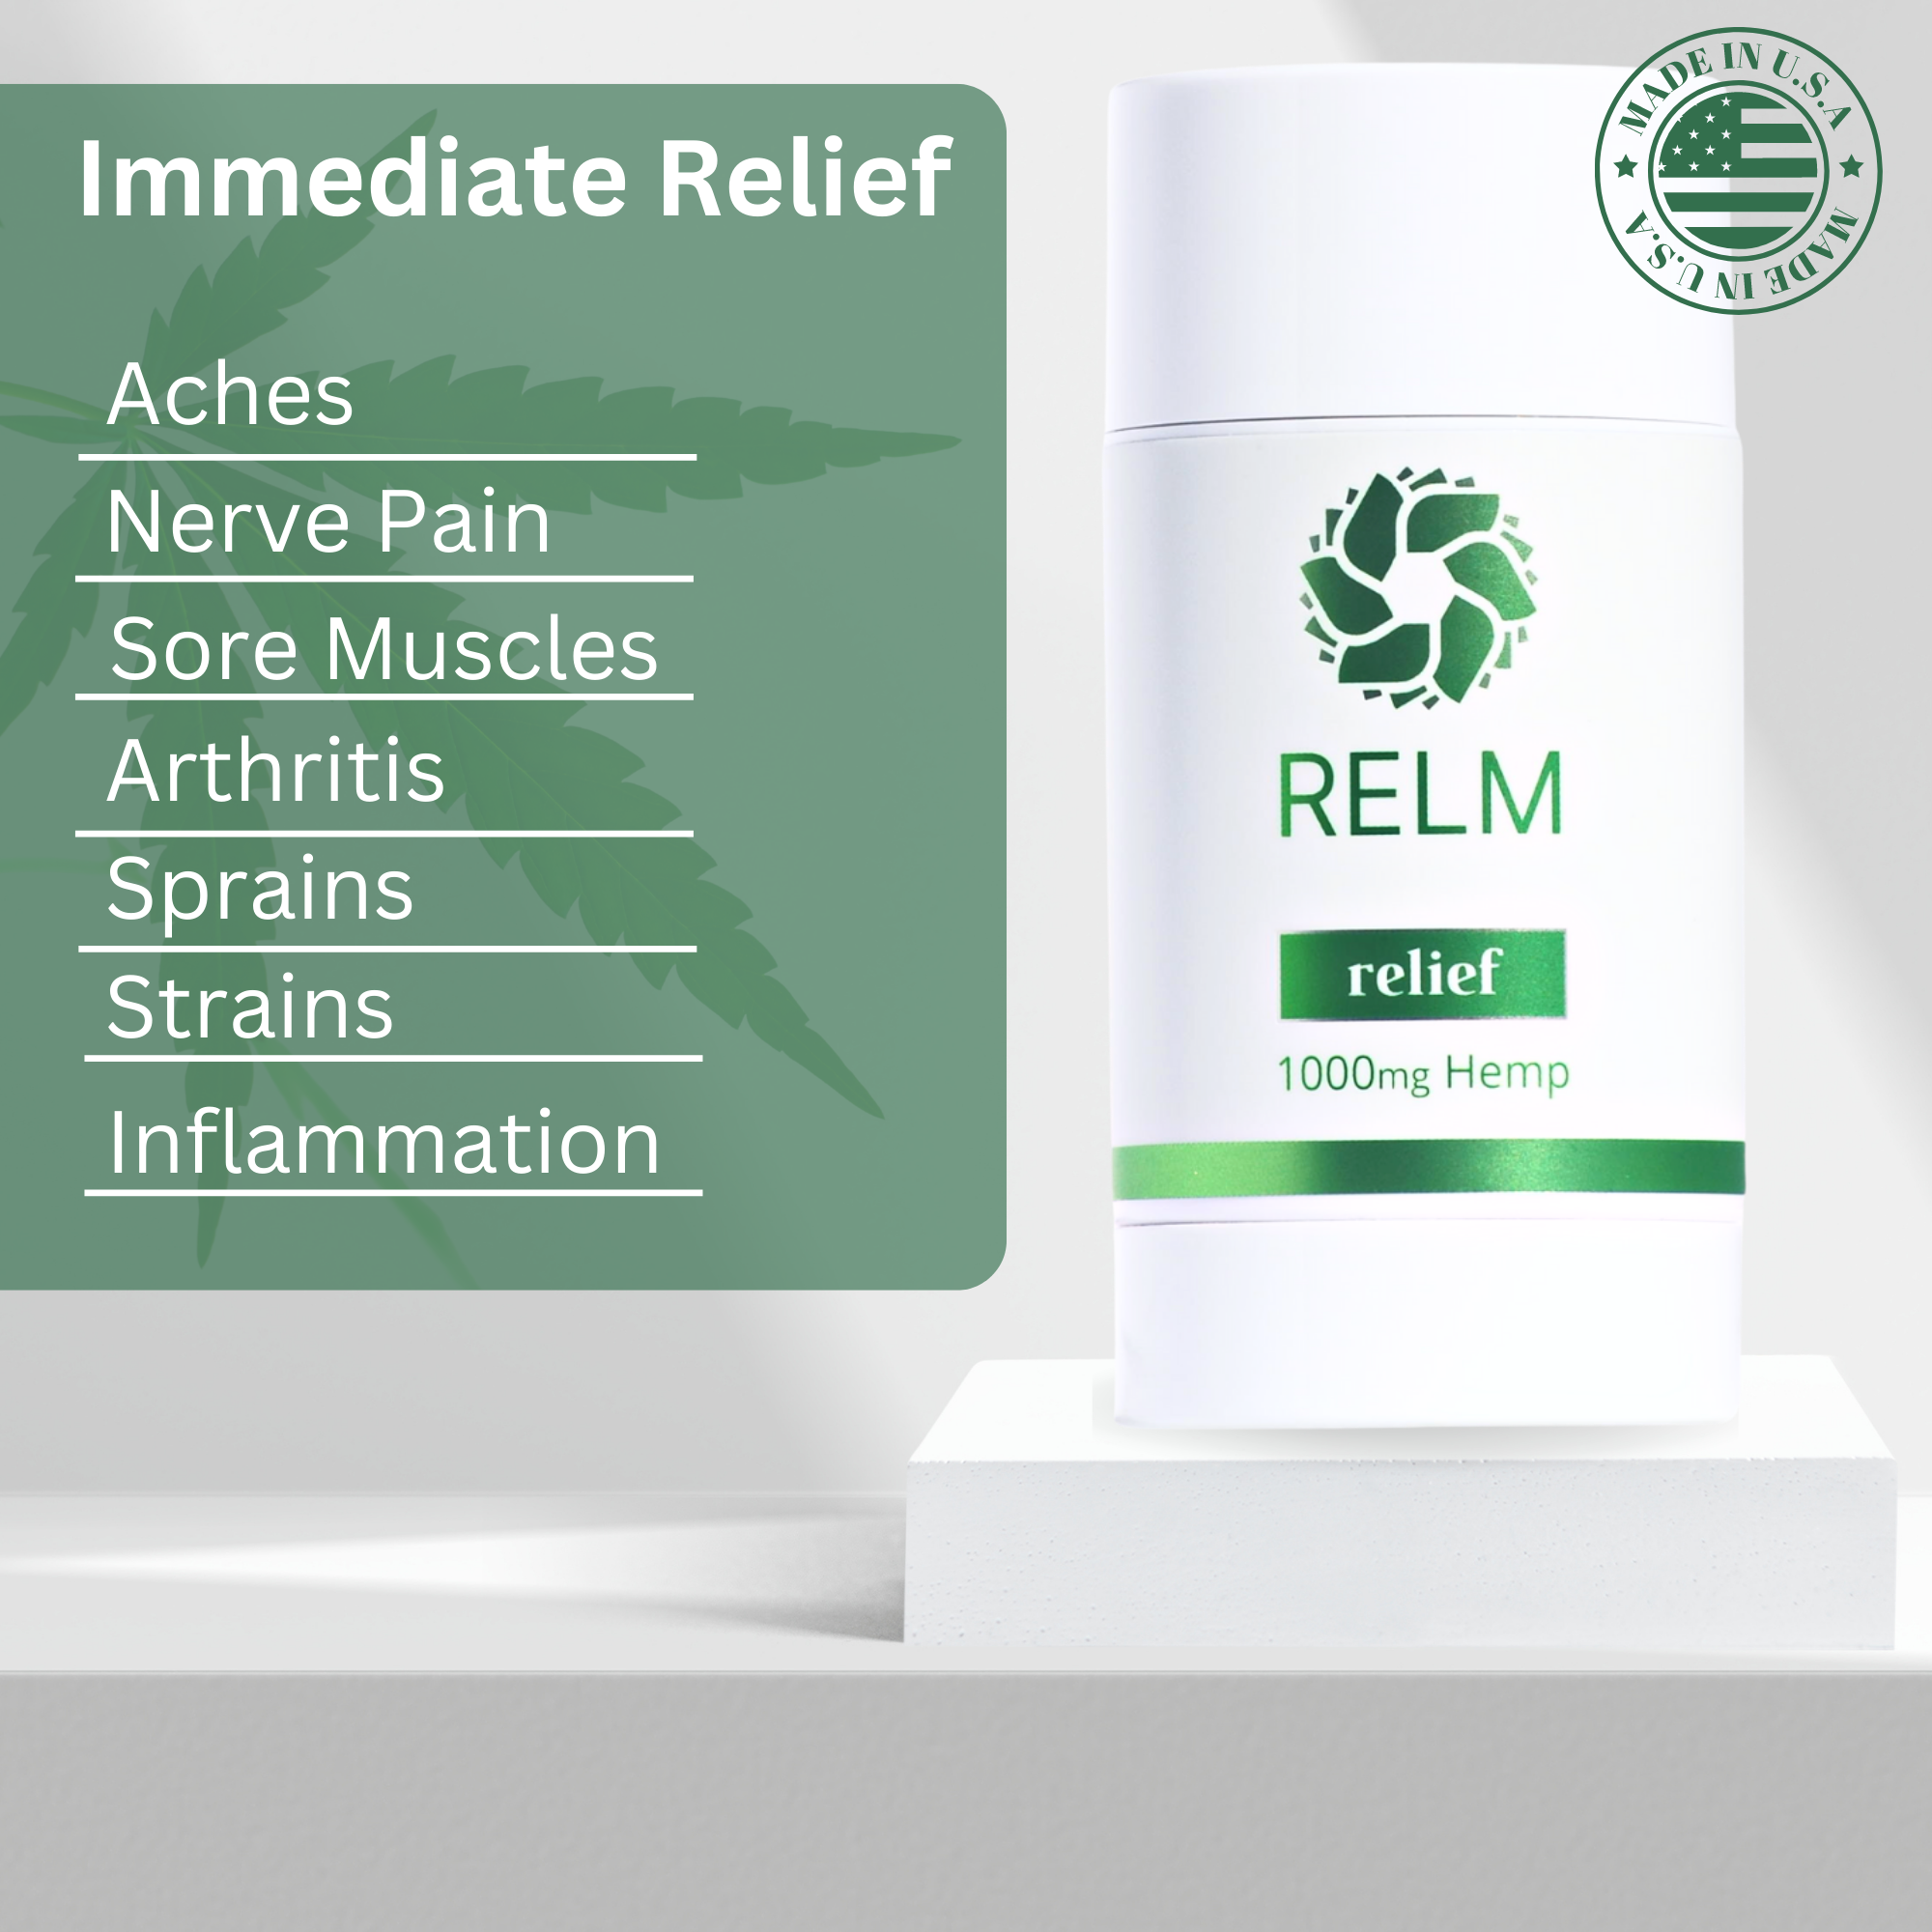 Arthritis relief body cream | Recovery Stick | Muscle Pain Relief Stick | Hemp Hand Cream for Arthritis | Pain Relief Stick | Relm Healing Relief Stick for Pain and Arthritis | Best cream topical for pain relief | Use on knees, lower back, elbow, wrist, hands, arthritis, nerve pain, neuropathy | Menthol pain relief lotion